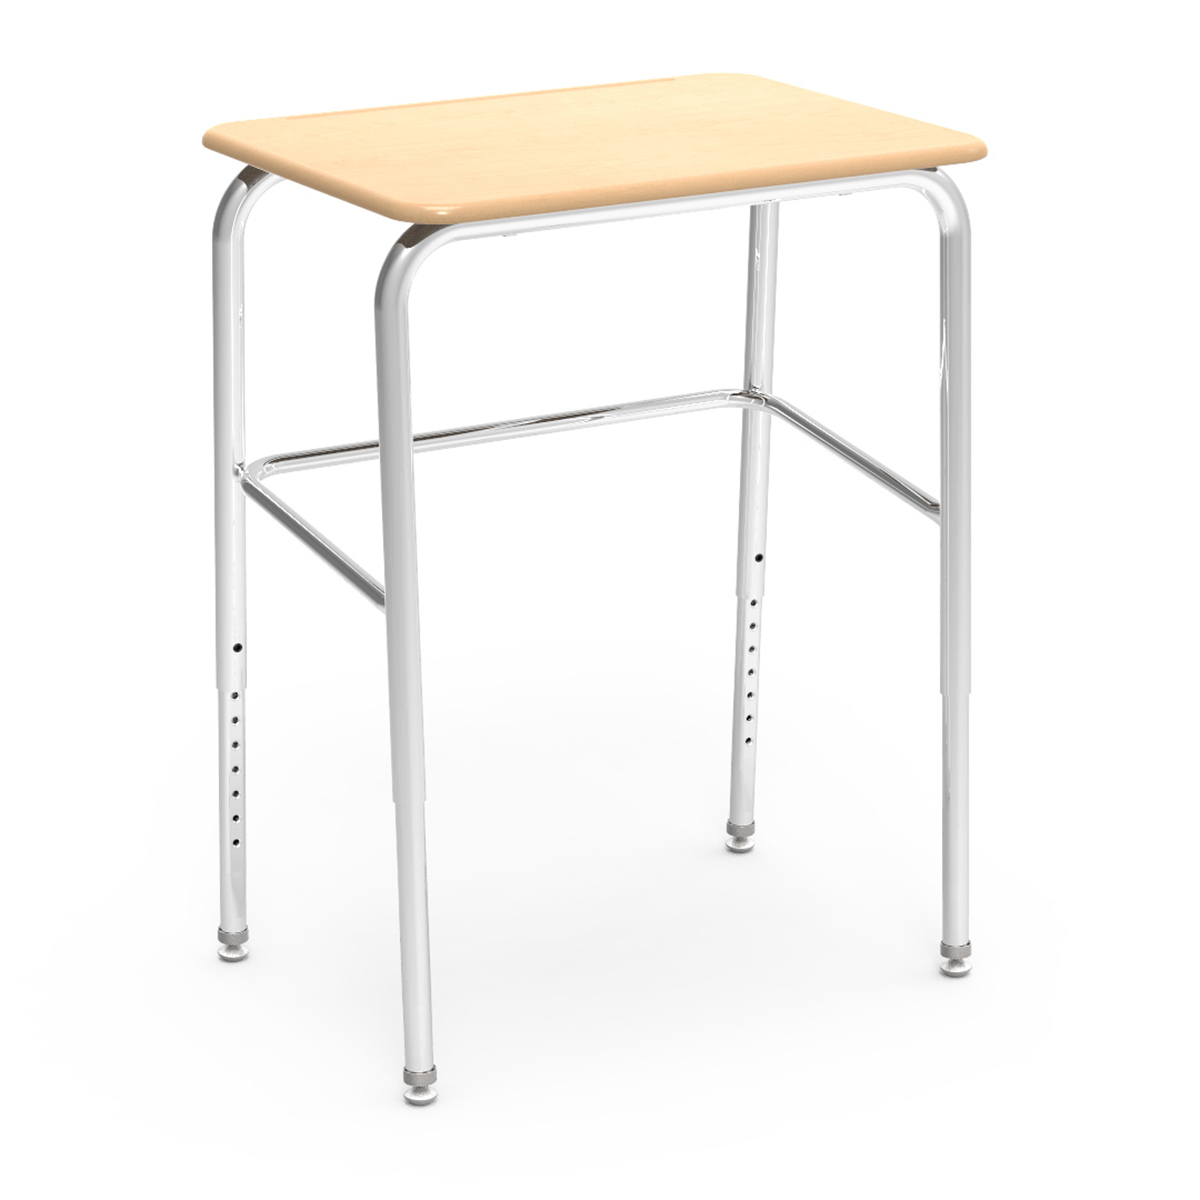 Virco 72 Series Adjustable Height Student Desk with Hard Plastic Top